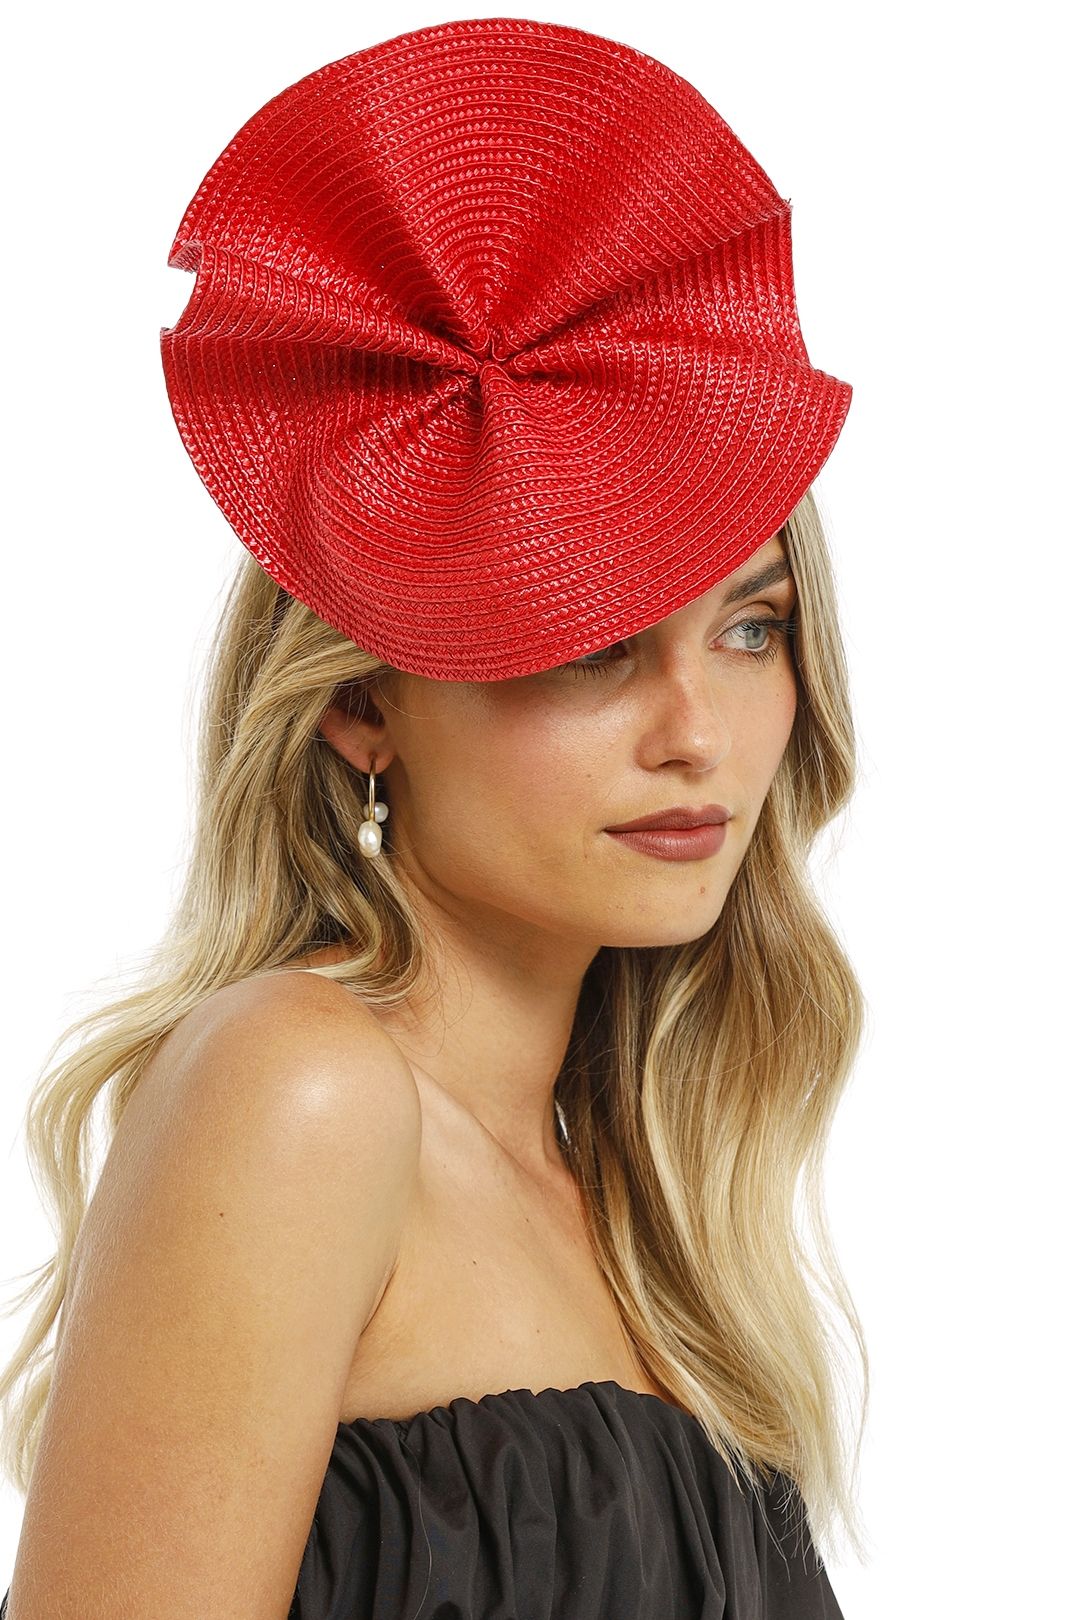 Zaria Fascinator in Red by Morgan and Taylor Headwear